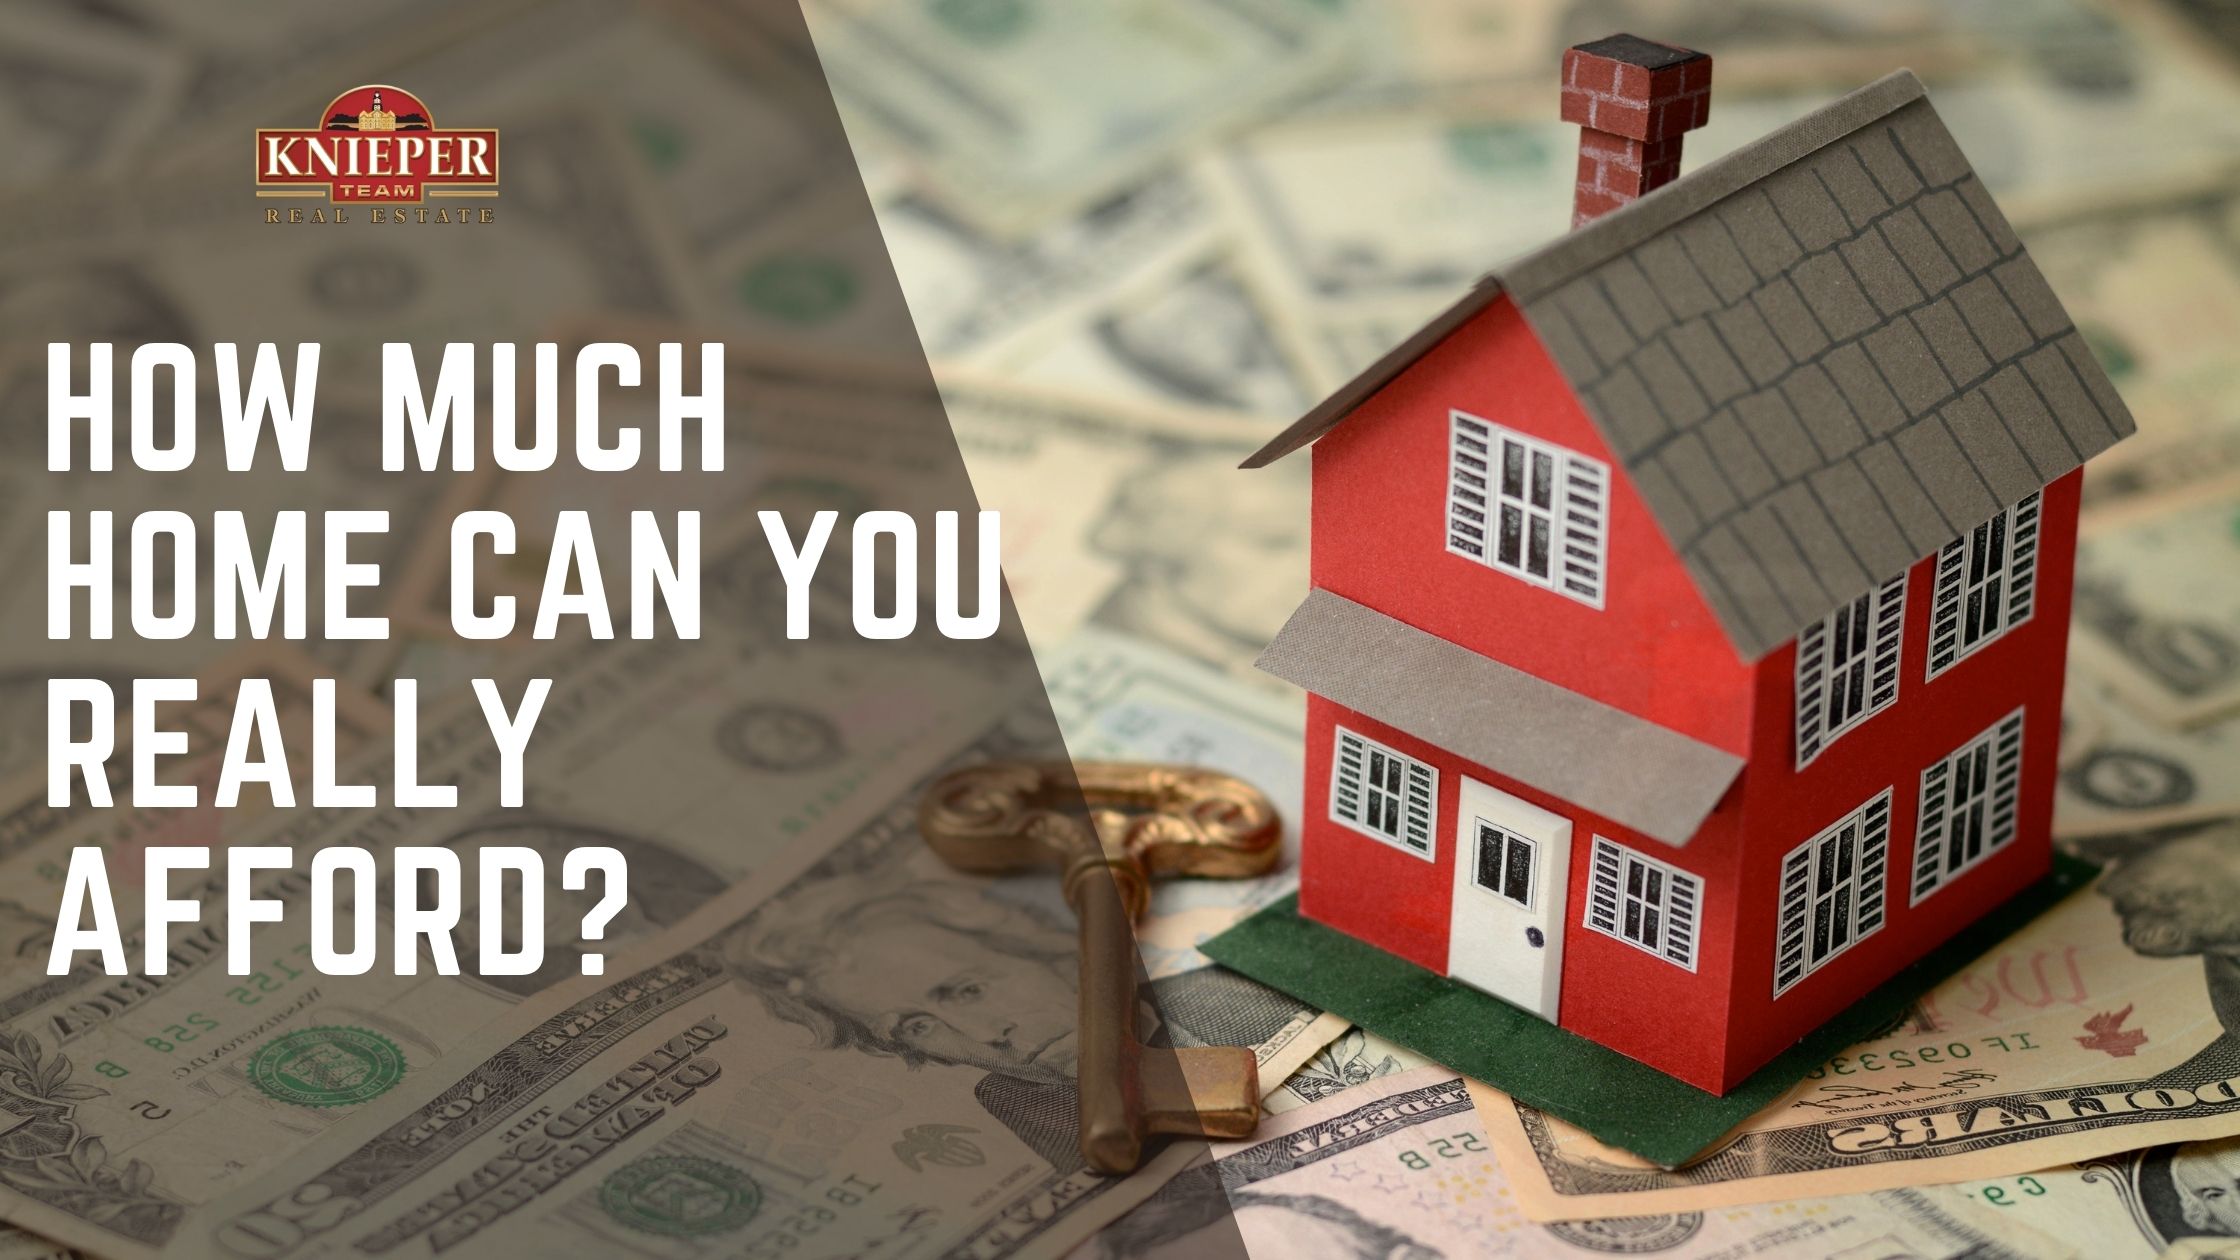 How Much Home Can You Really Afford